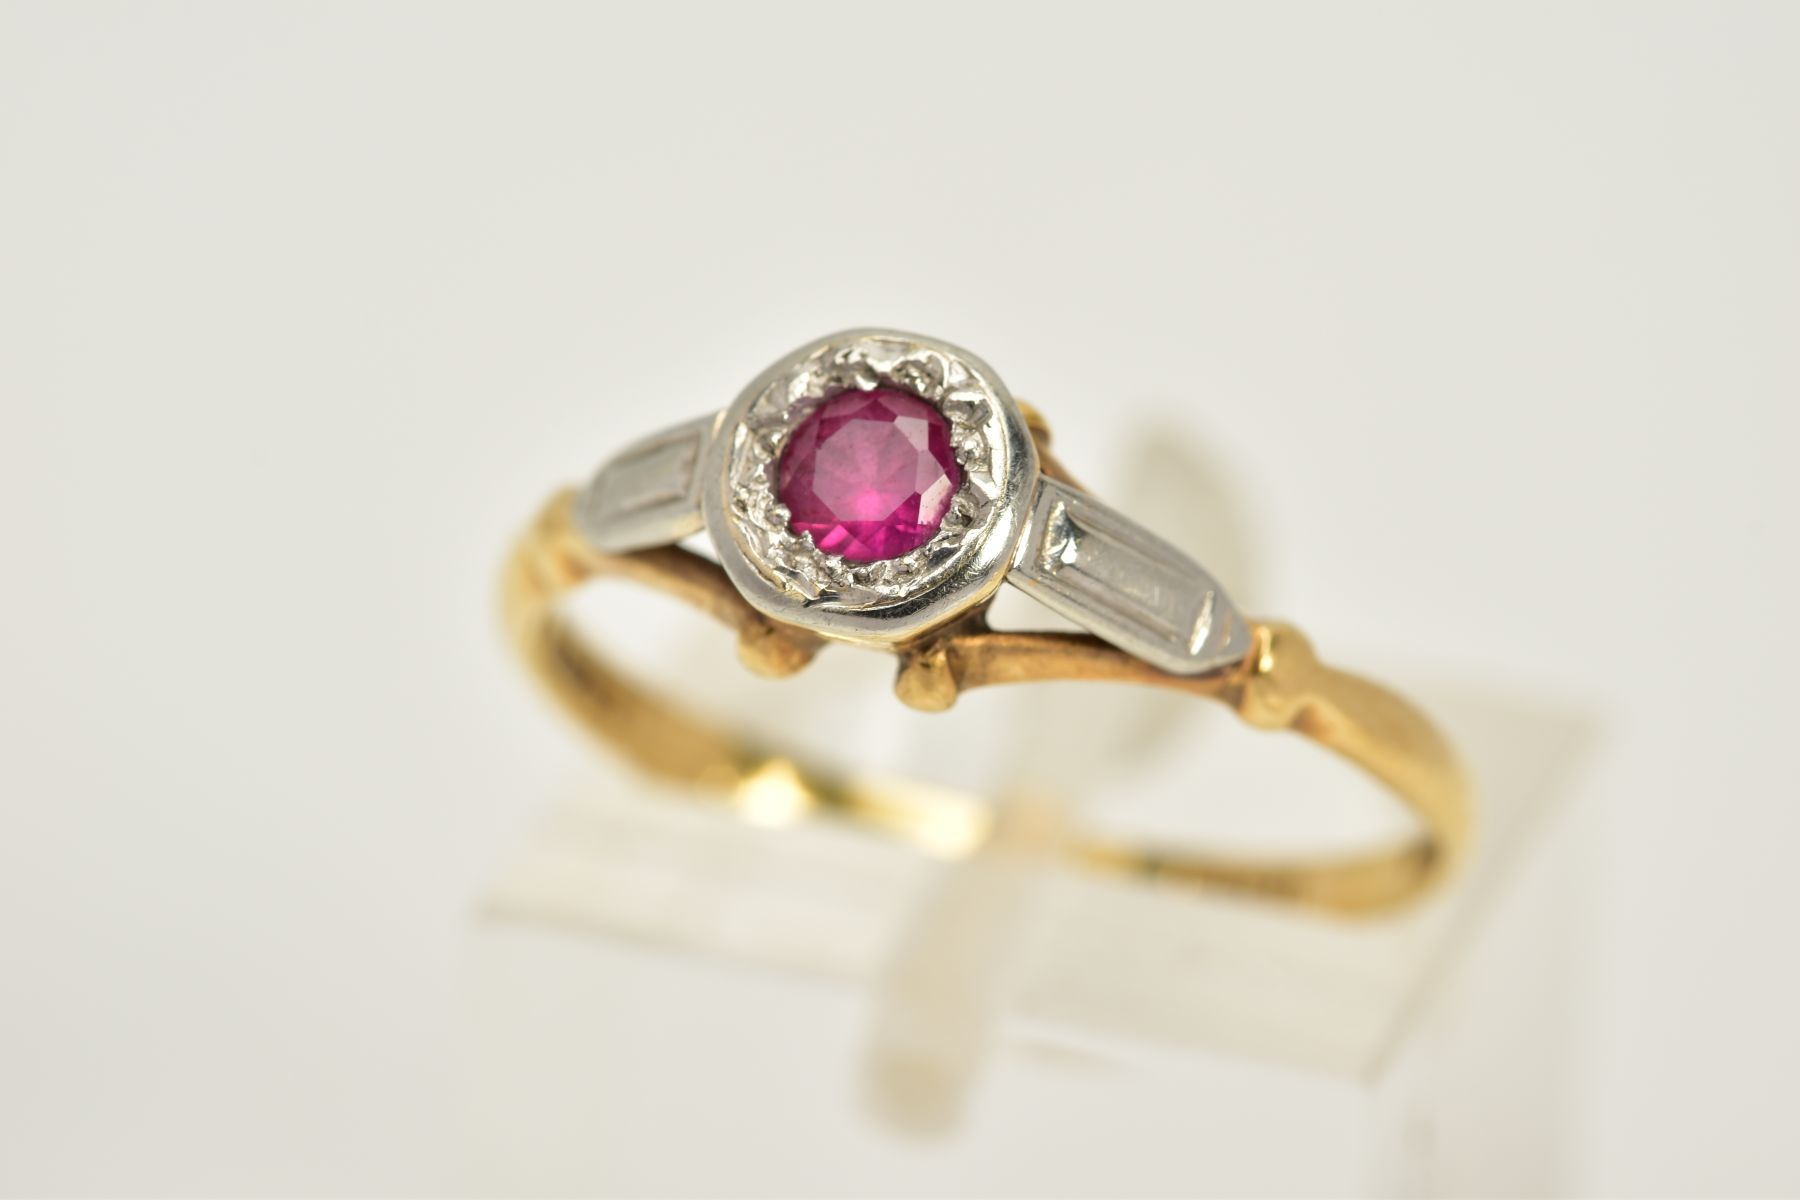 A YELLOW METAL RUBY RING, designed with a single circular cut ruby within a collet mount, textured